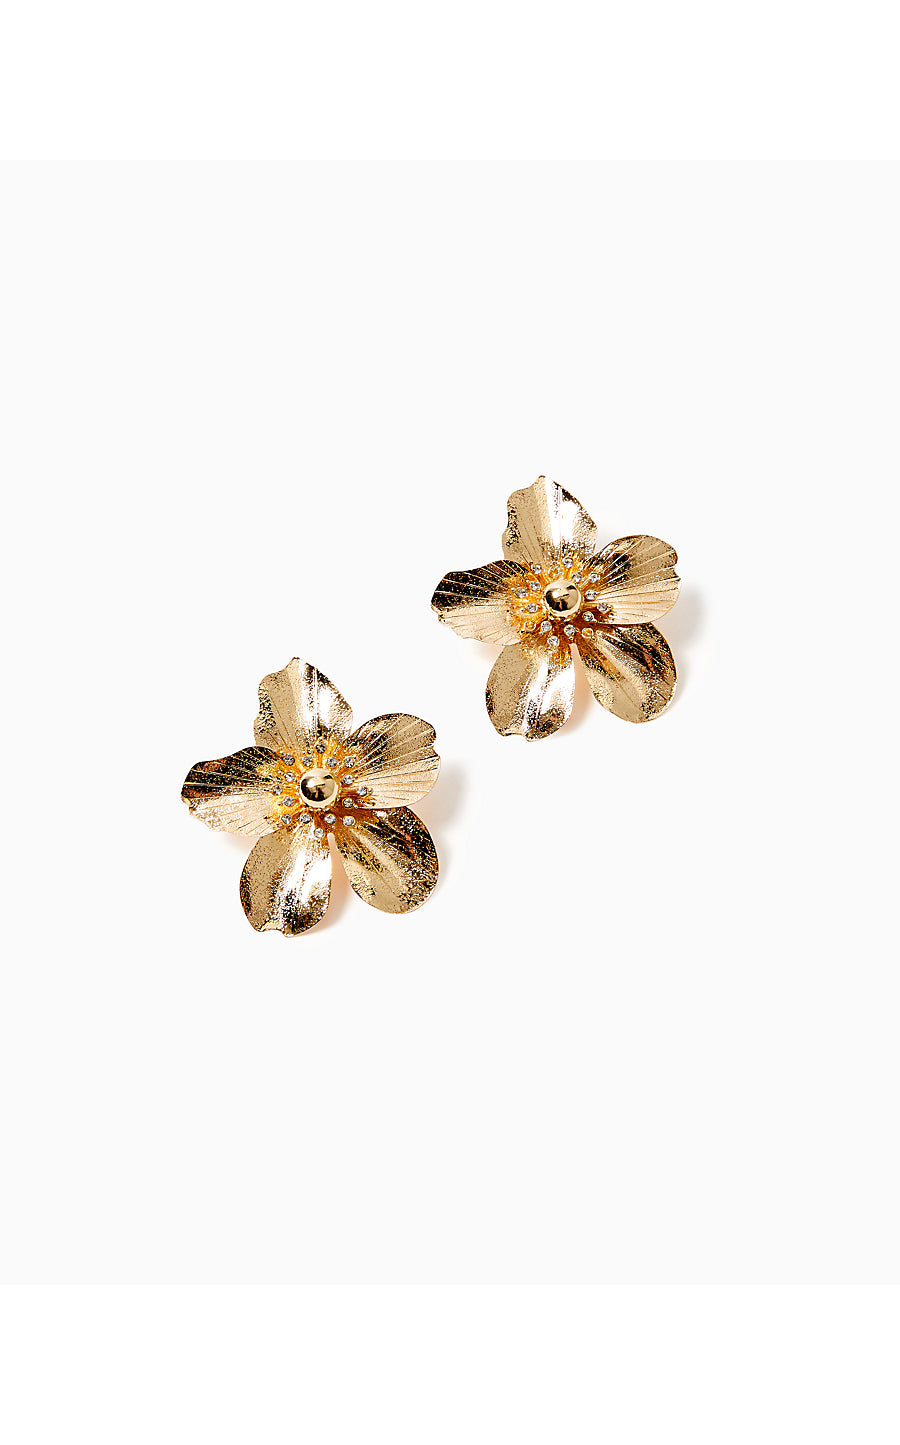 SMALL ORCHID EARRINGS - GOLD METALLIC